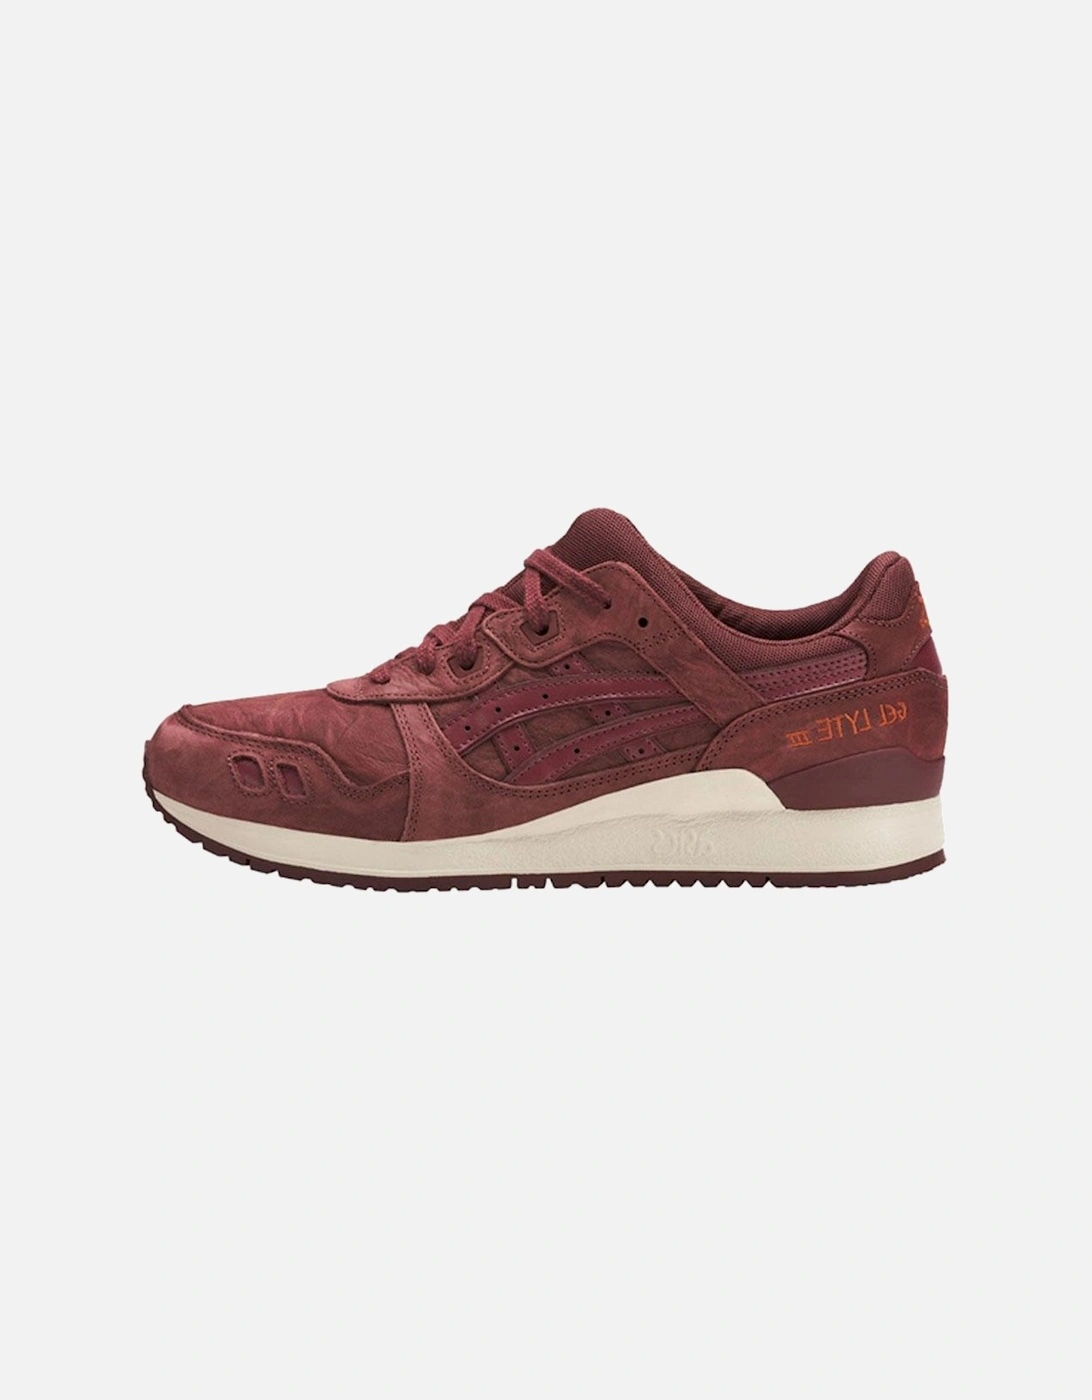 Gell Lyte III Trainers - Russet Brown  HL7V3-2626, 5 of 4